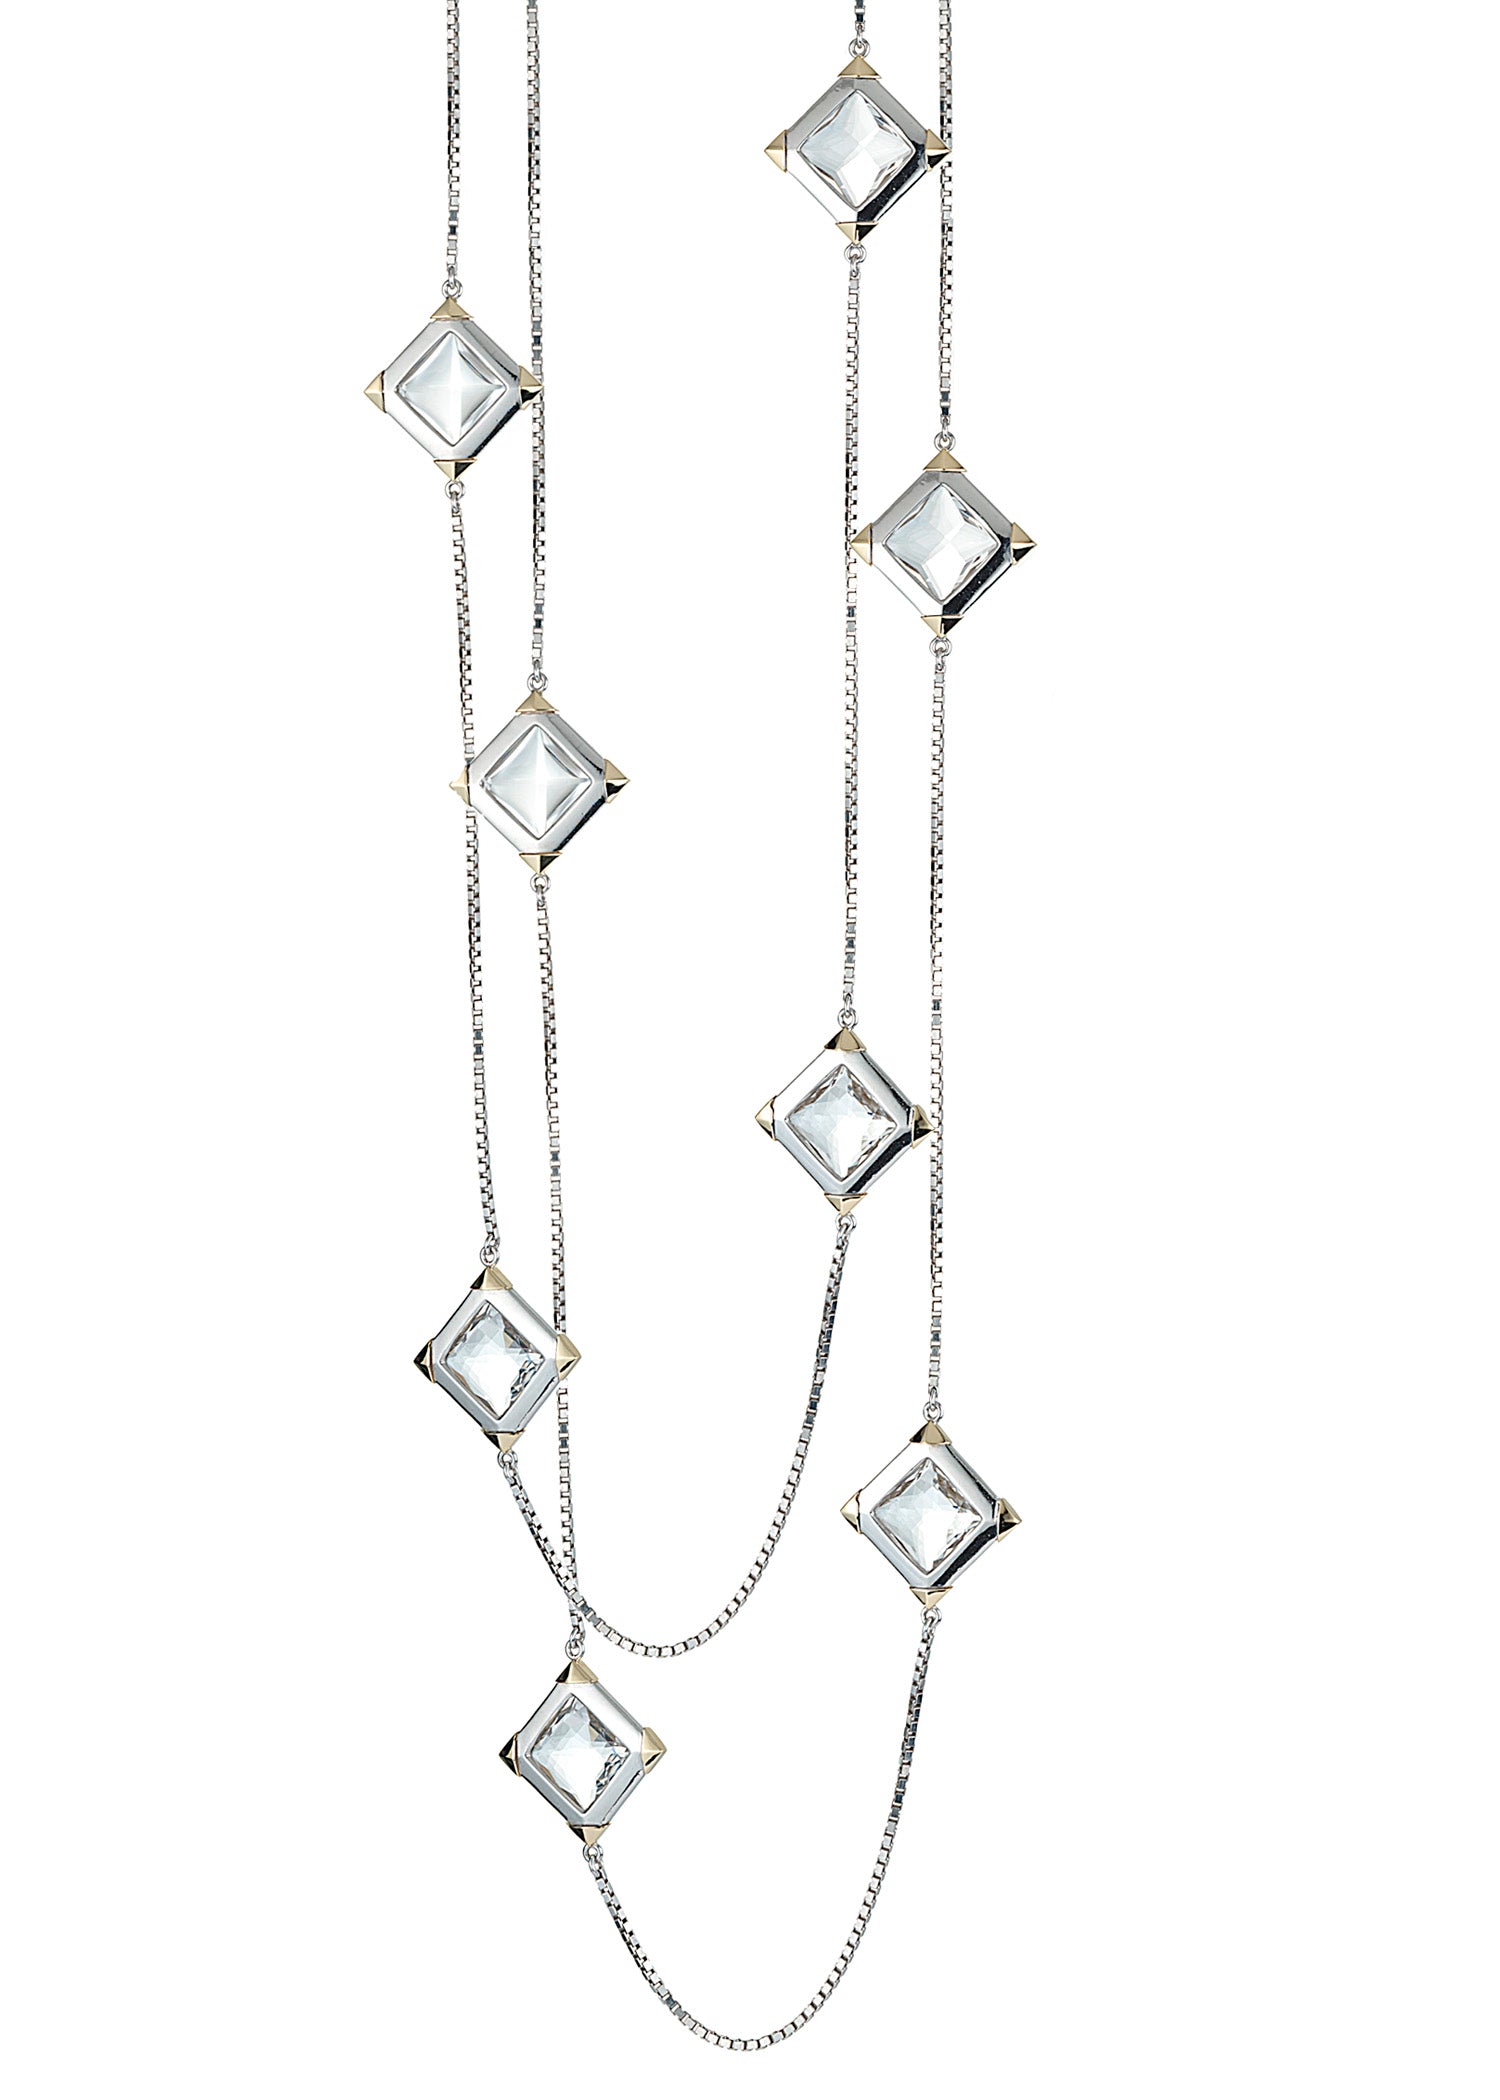 sterling silver and 18k lisere necklace with faceted clear quartz